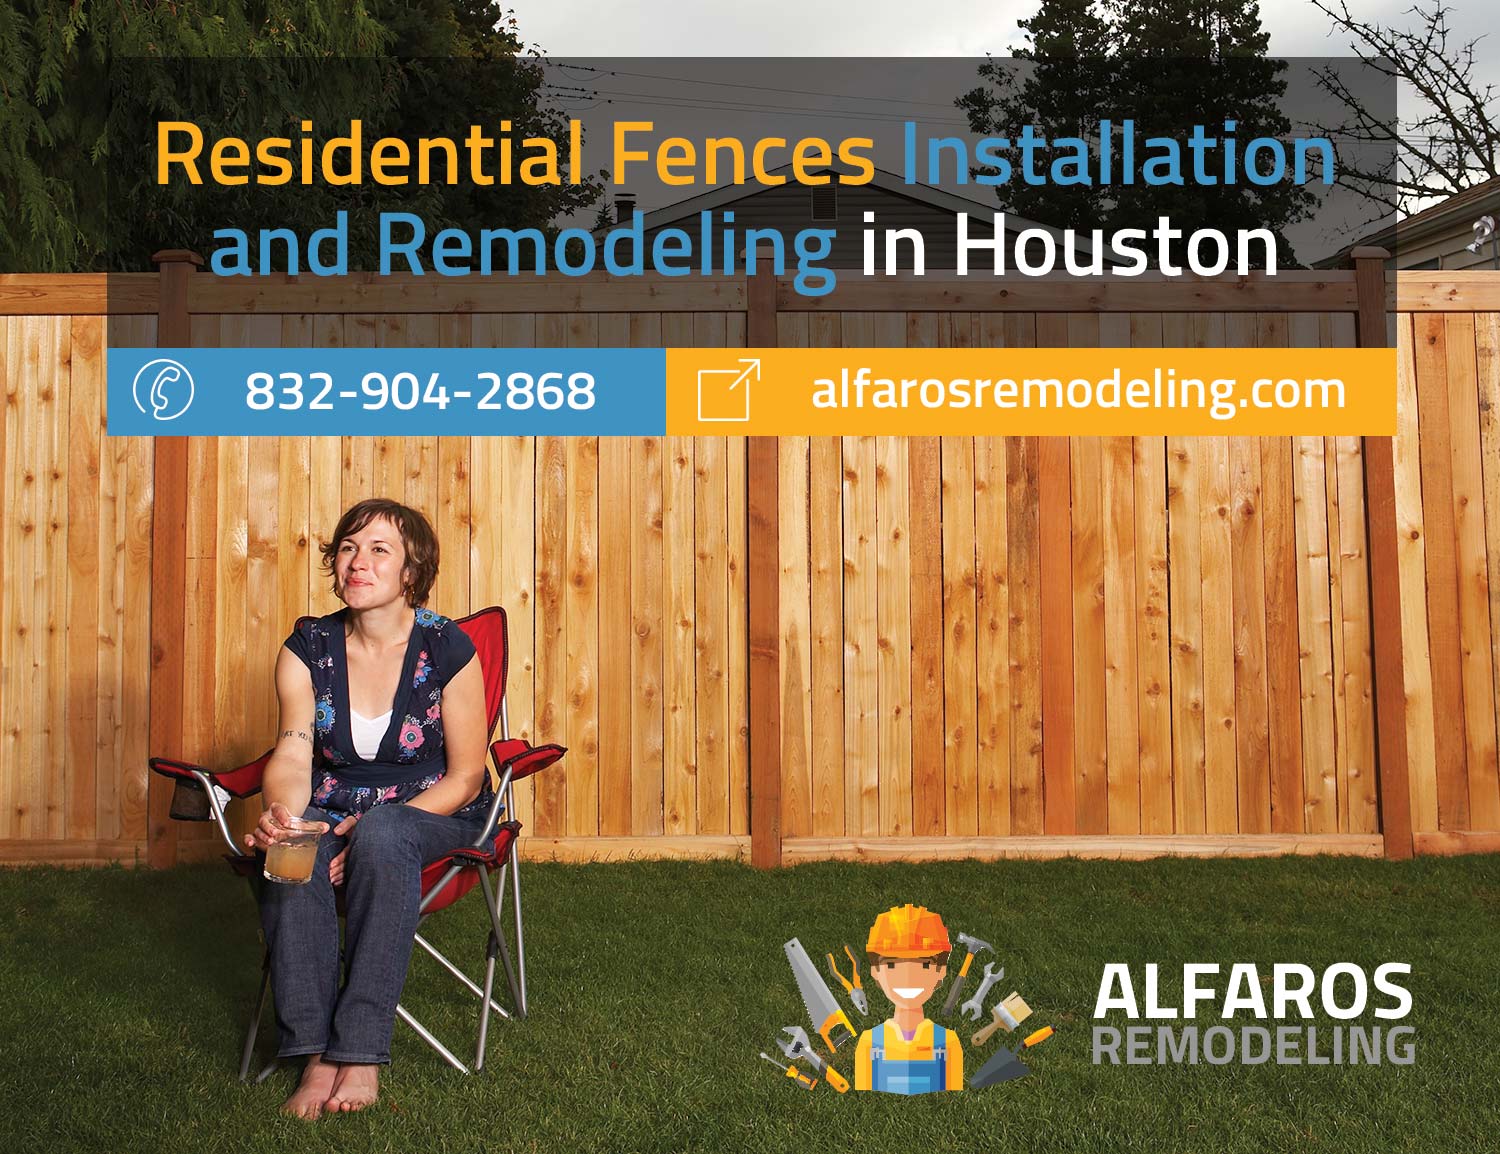 Fences Installation and Remodeling